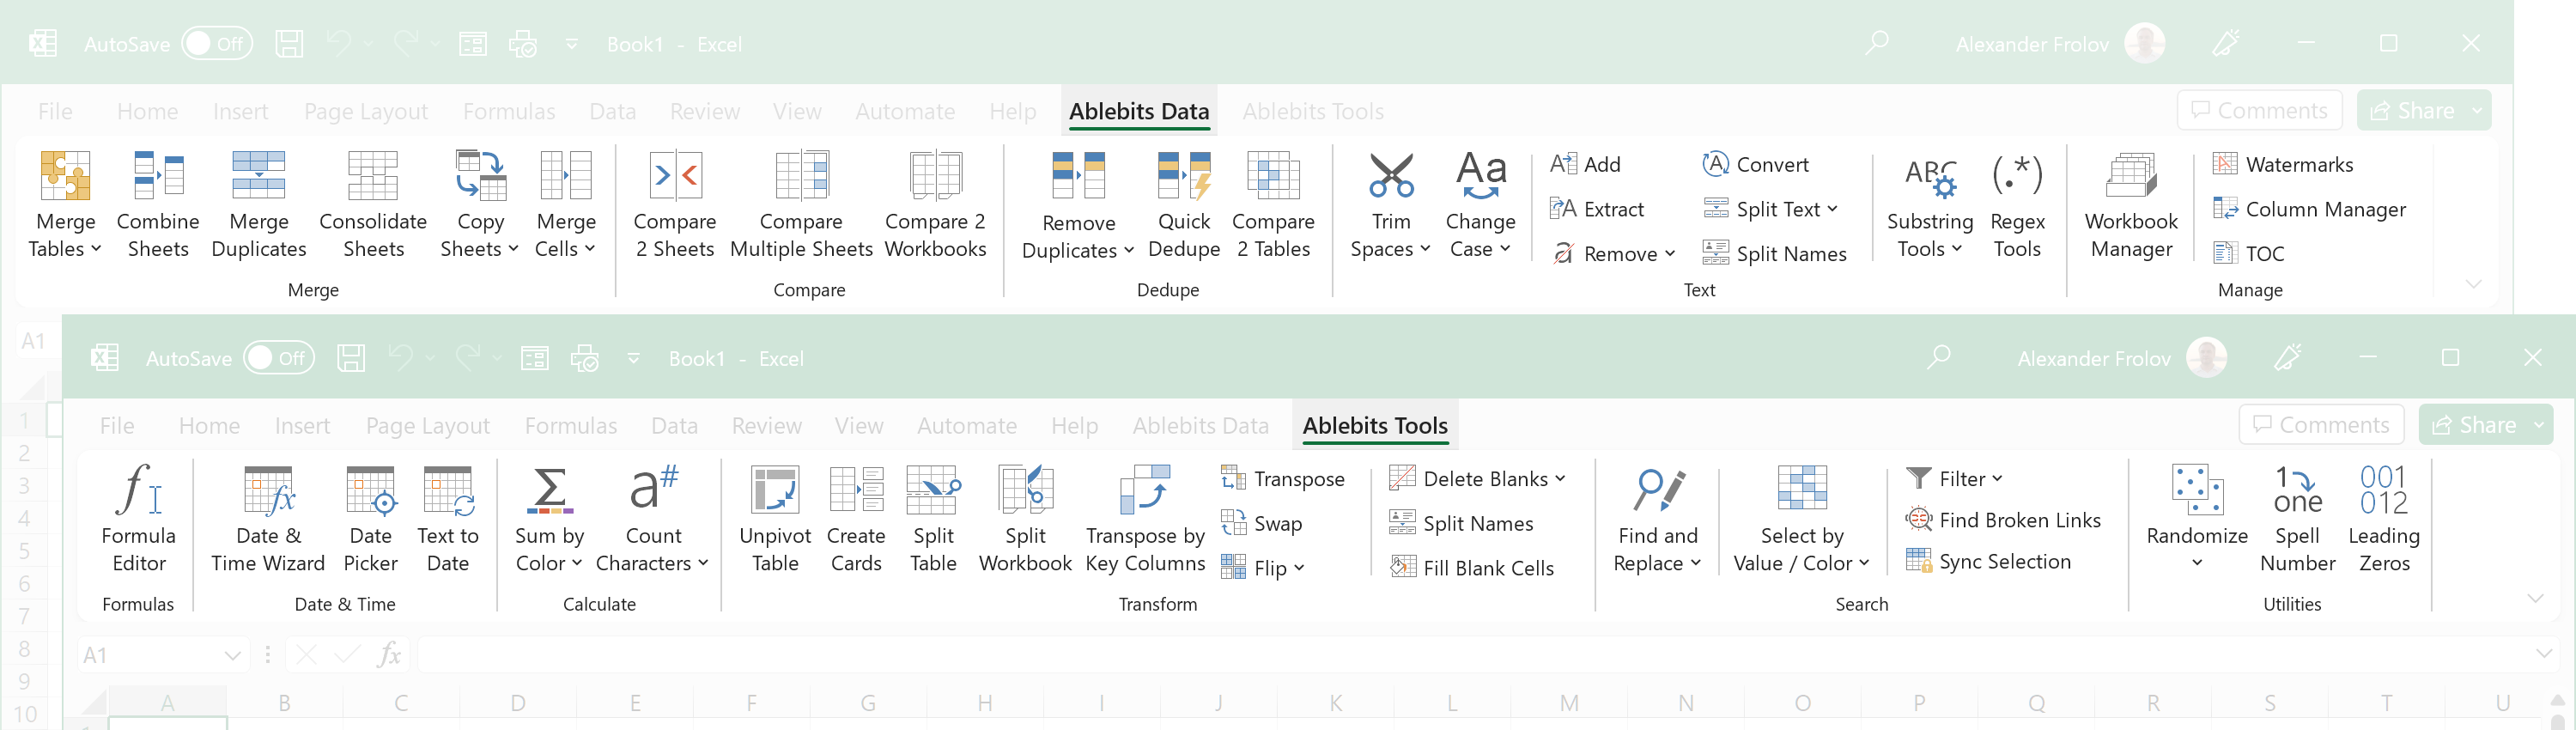 70+ time-saving tools for Excel